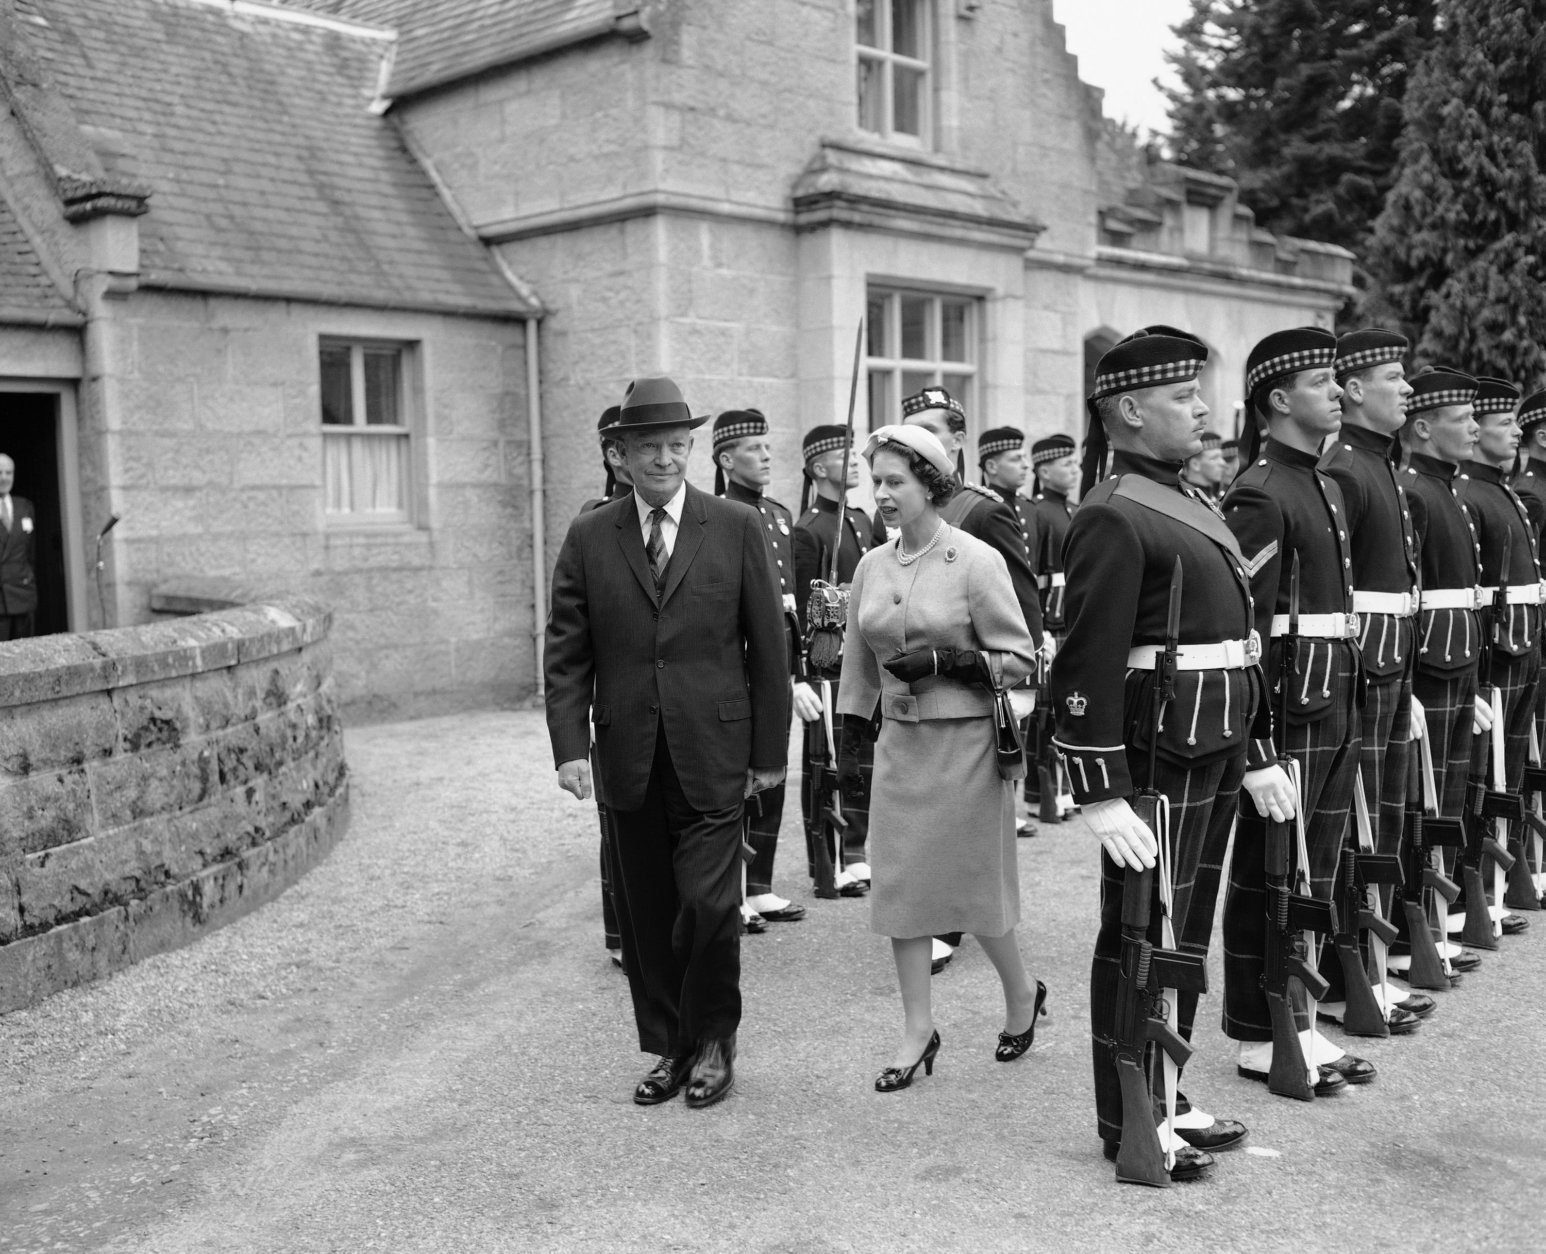 Queen Elizabeth escorts visiting President Dwight D. Eisenhower as they review the Royal Bodyguard, the Royal Highland Fusiliers, at the gates of Balmoral Castle in Scotland, Aug. 28, 1959. The president flew from London to be the Queen's guest. (AP Photo)